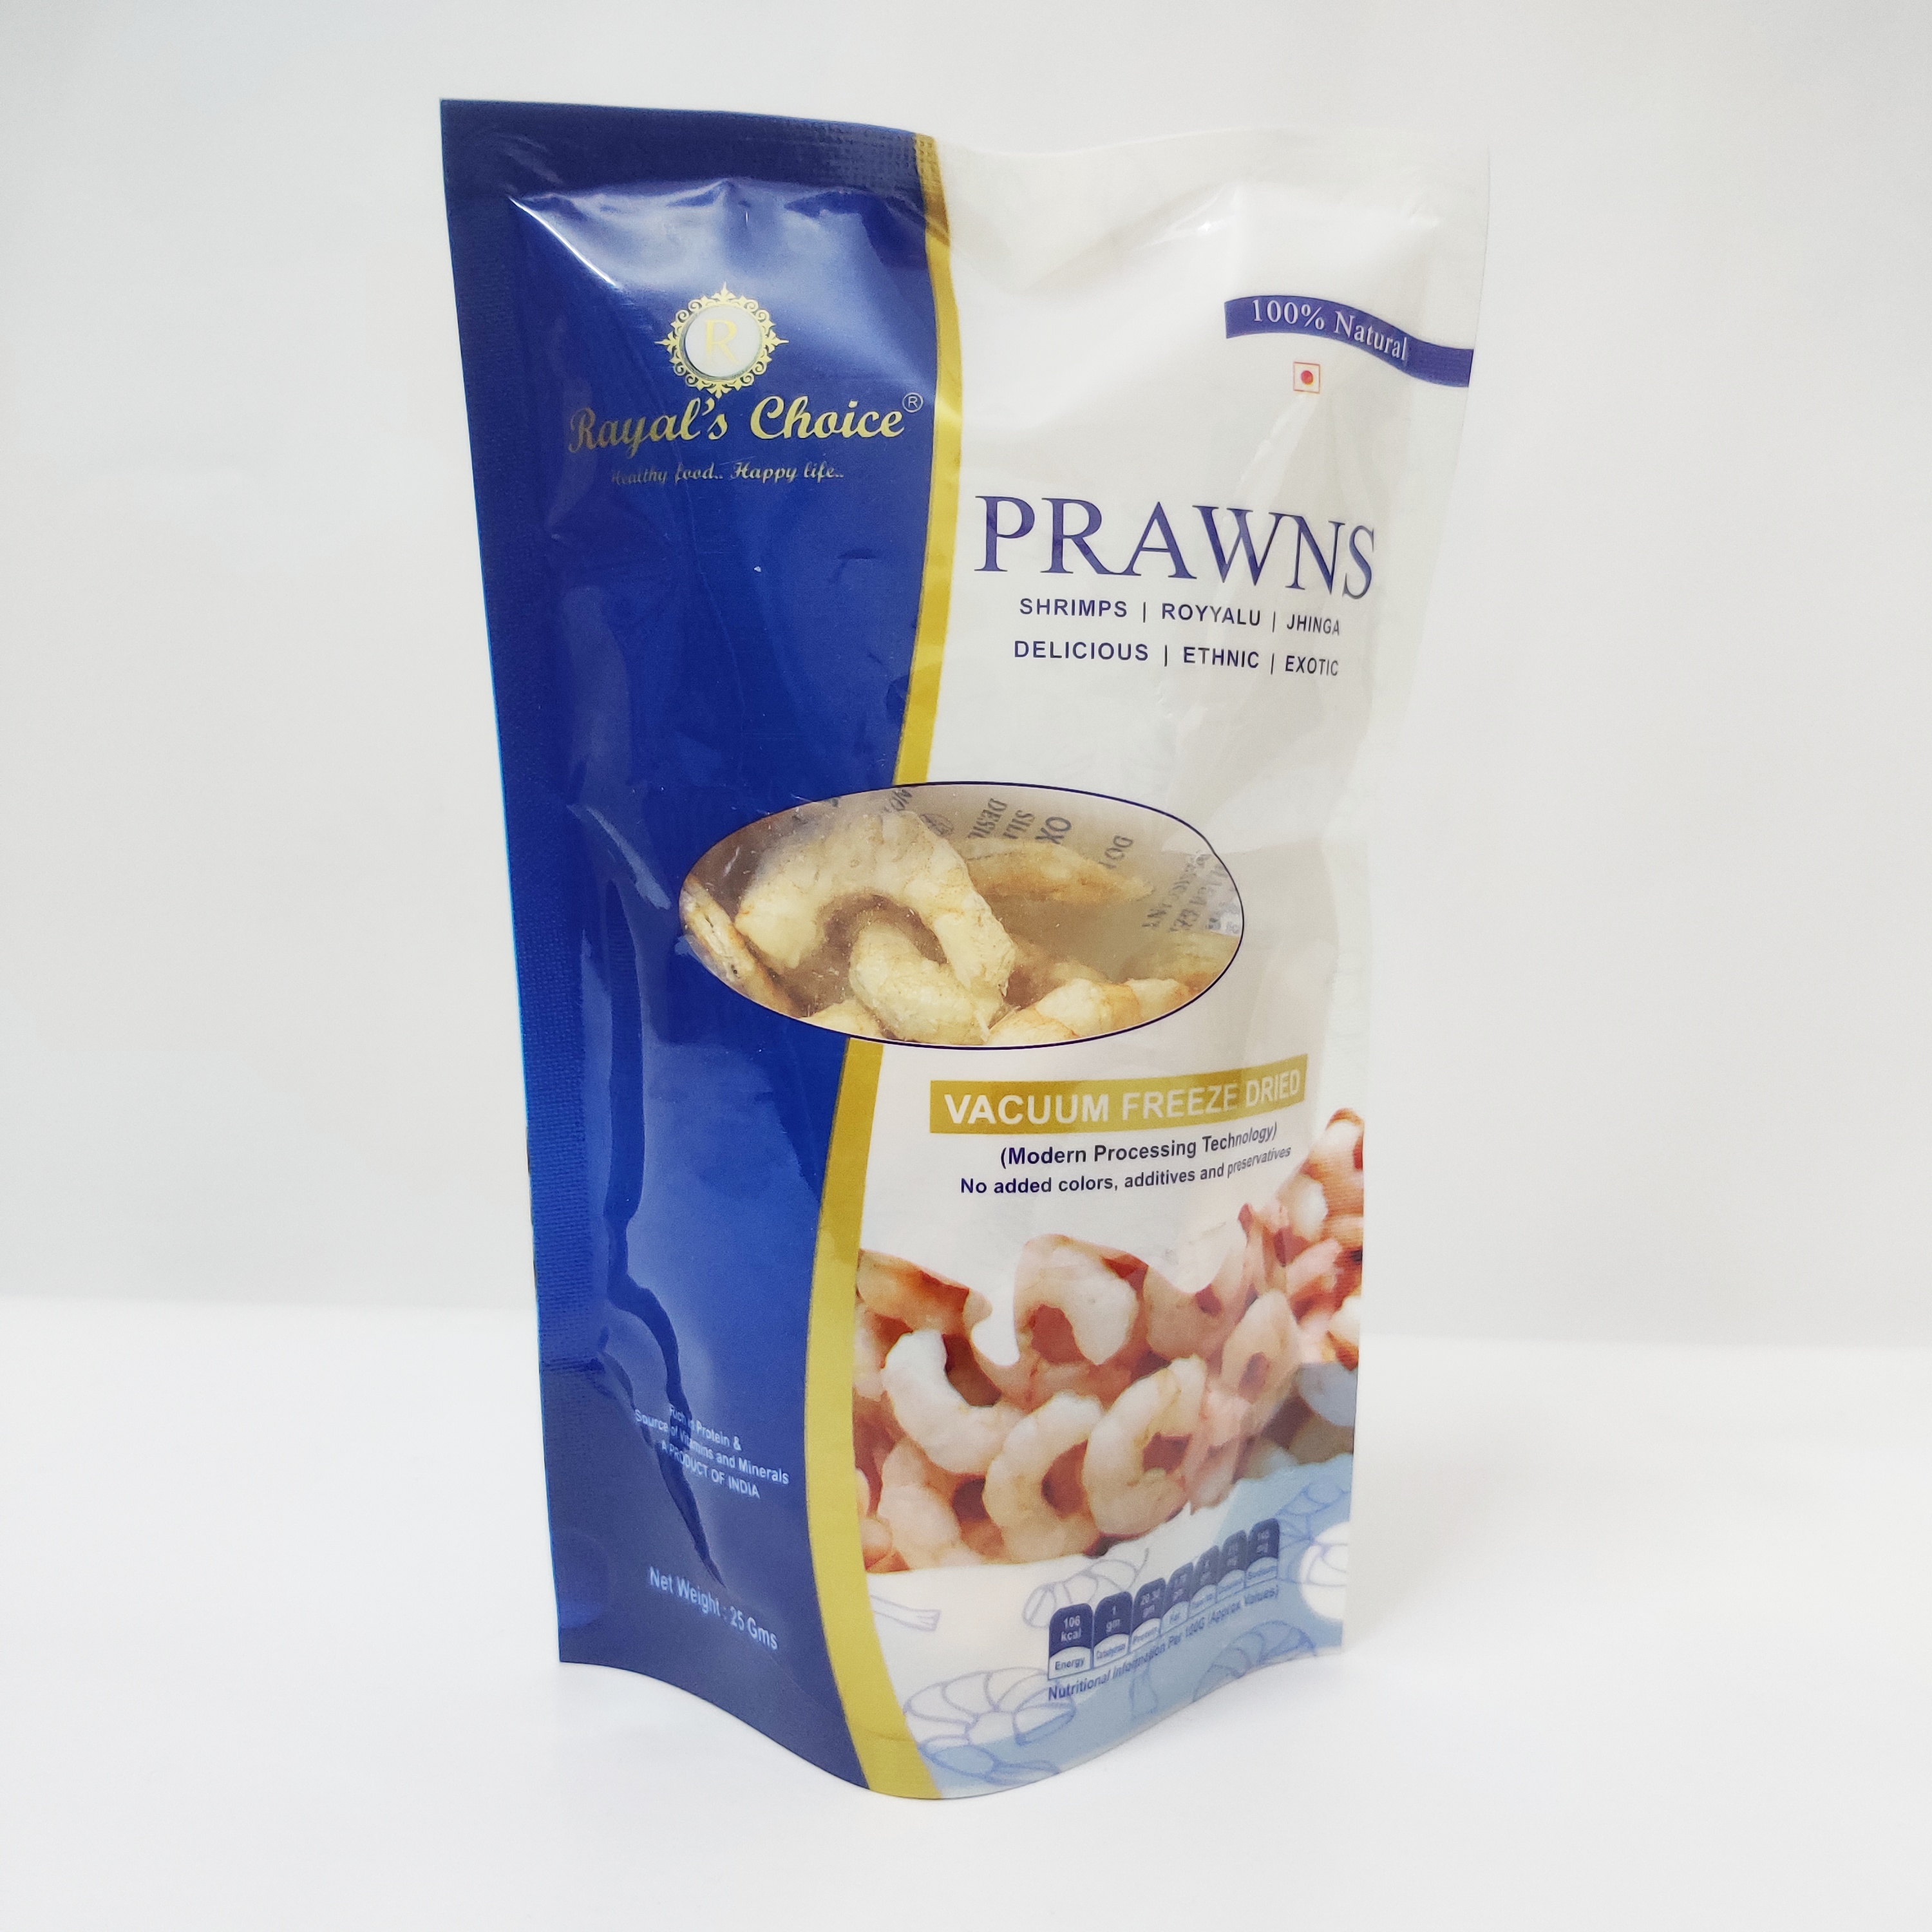 Rayals Choice Vacuum Freeze Dried Prawns / Shrimps / Sea Food | No Added Preservatives, No Additives | Tasty and Ready to Cook